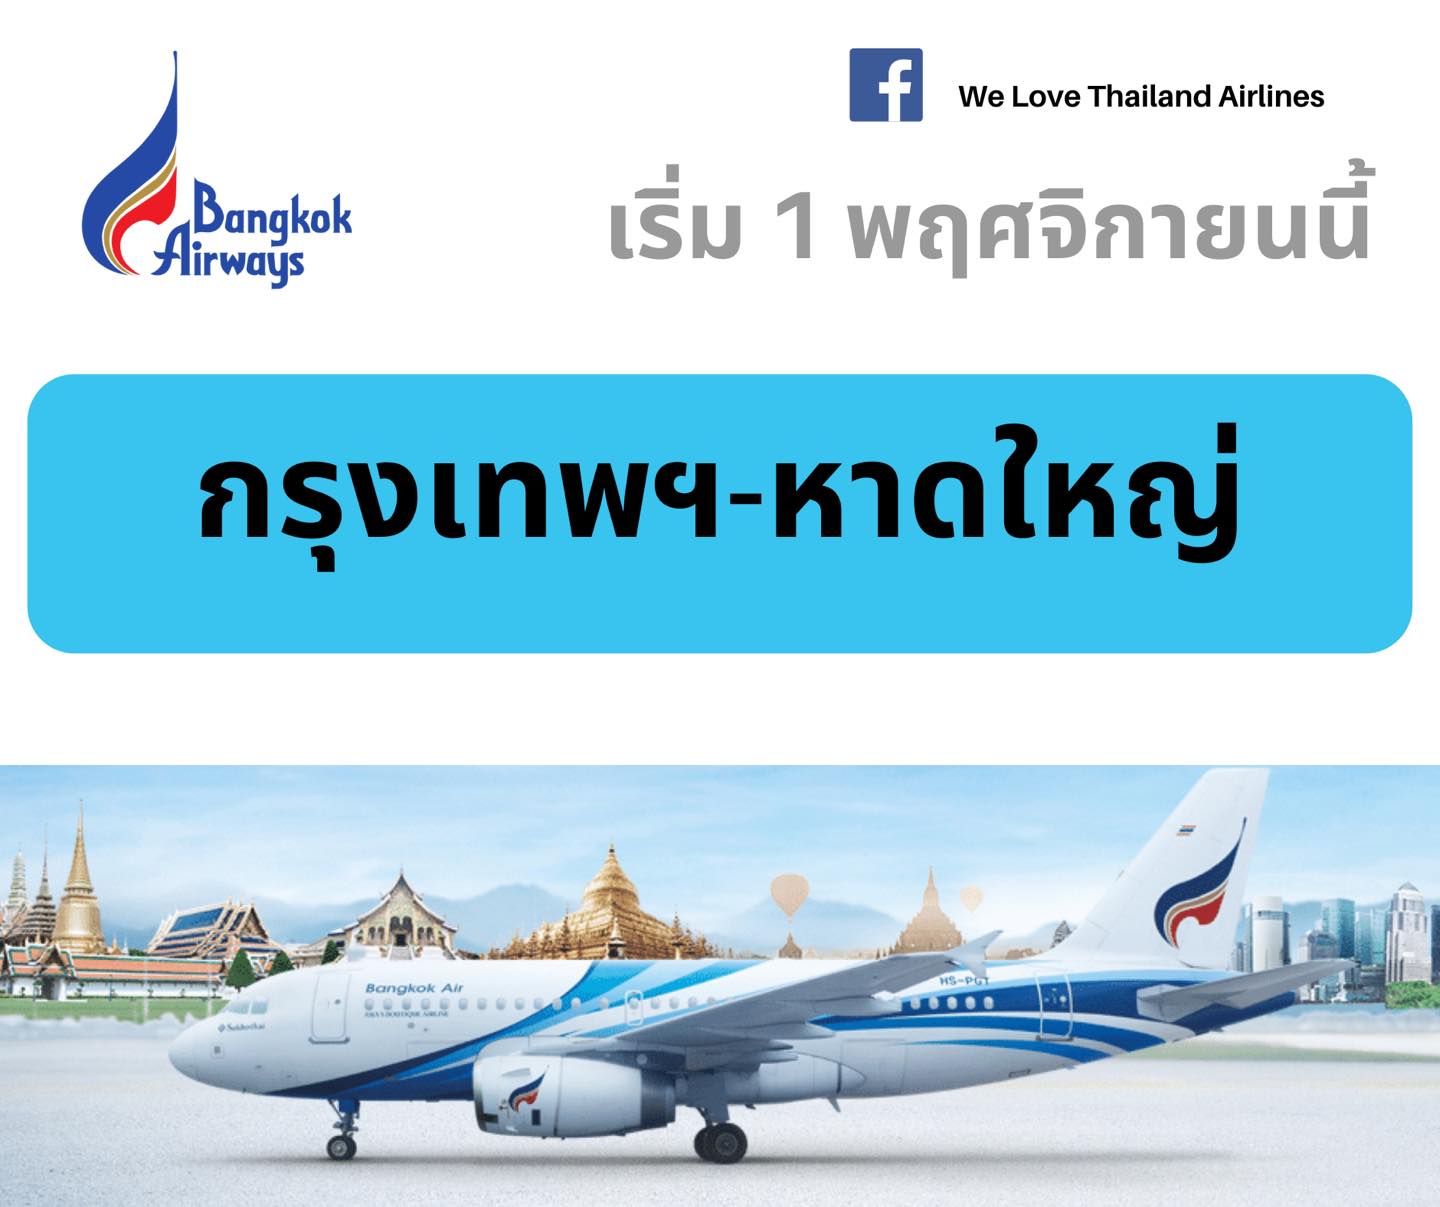 We Love Thailand Airlines